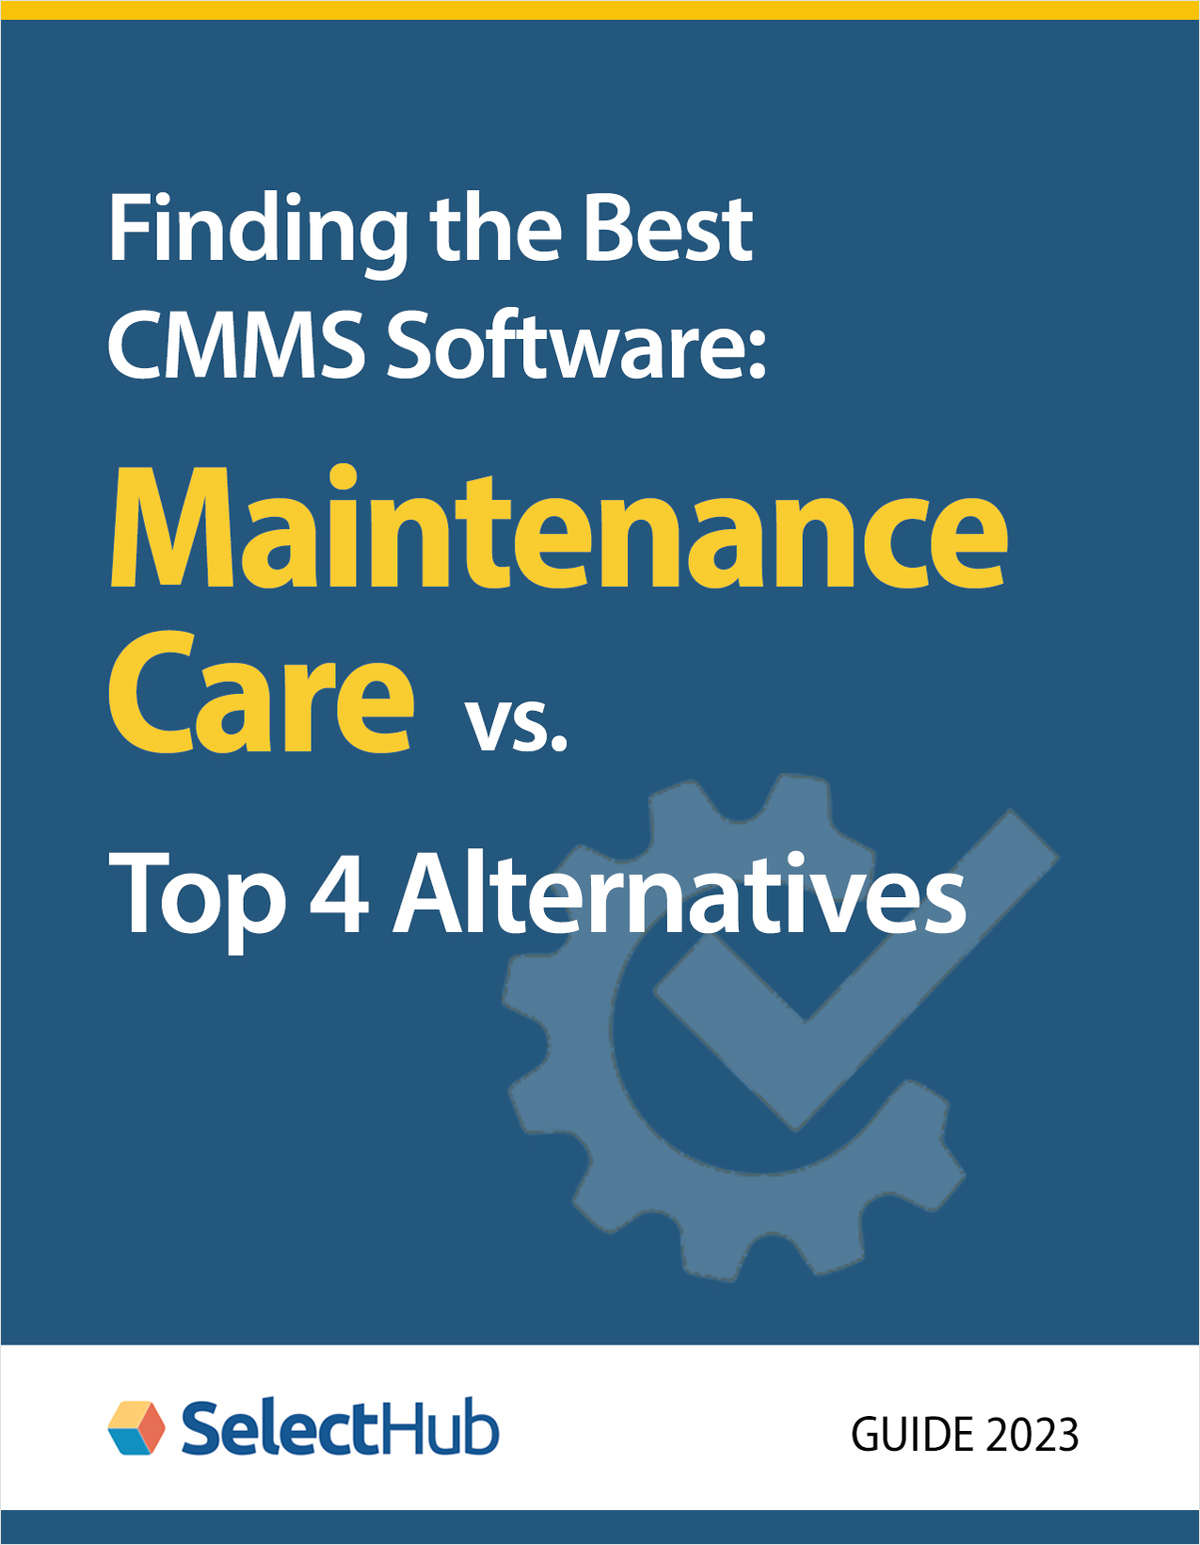 Finding the Best CMMS Software: Maintenance Care vs. Top 4 Alternatives